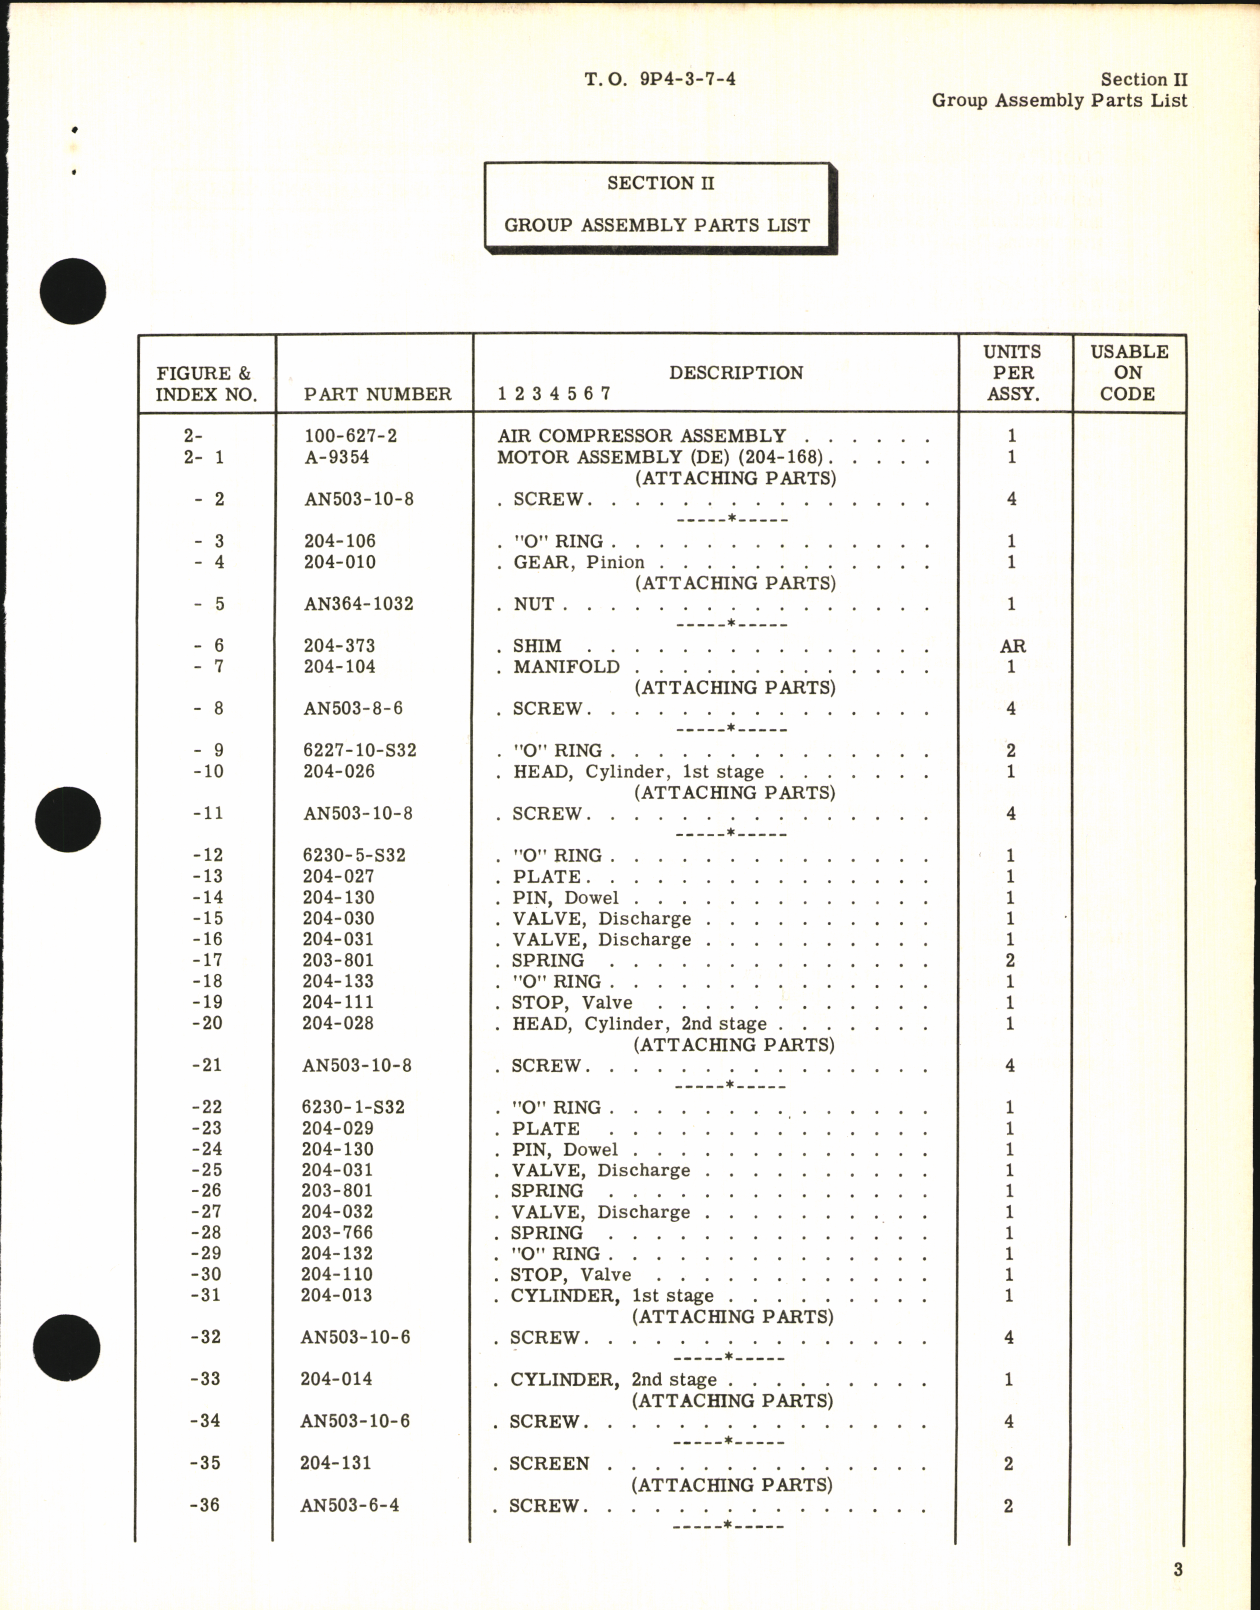 Sample page 7 from AirCorps Library document: Illustrated Parts Breakdown for Air Compressor Model 100-627-2